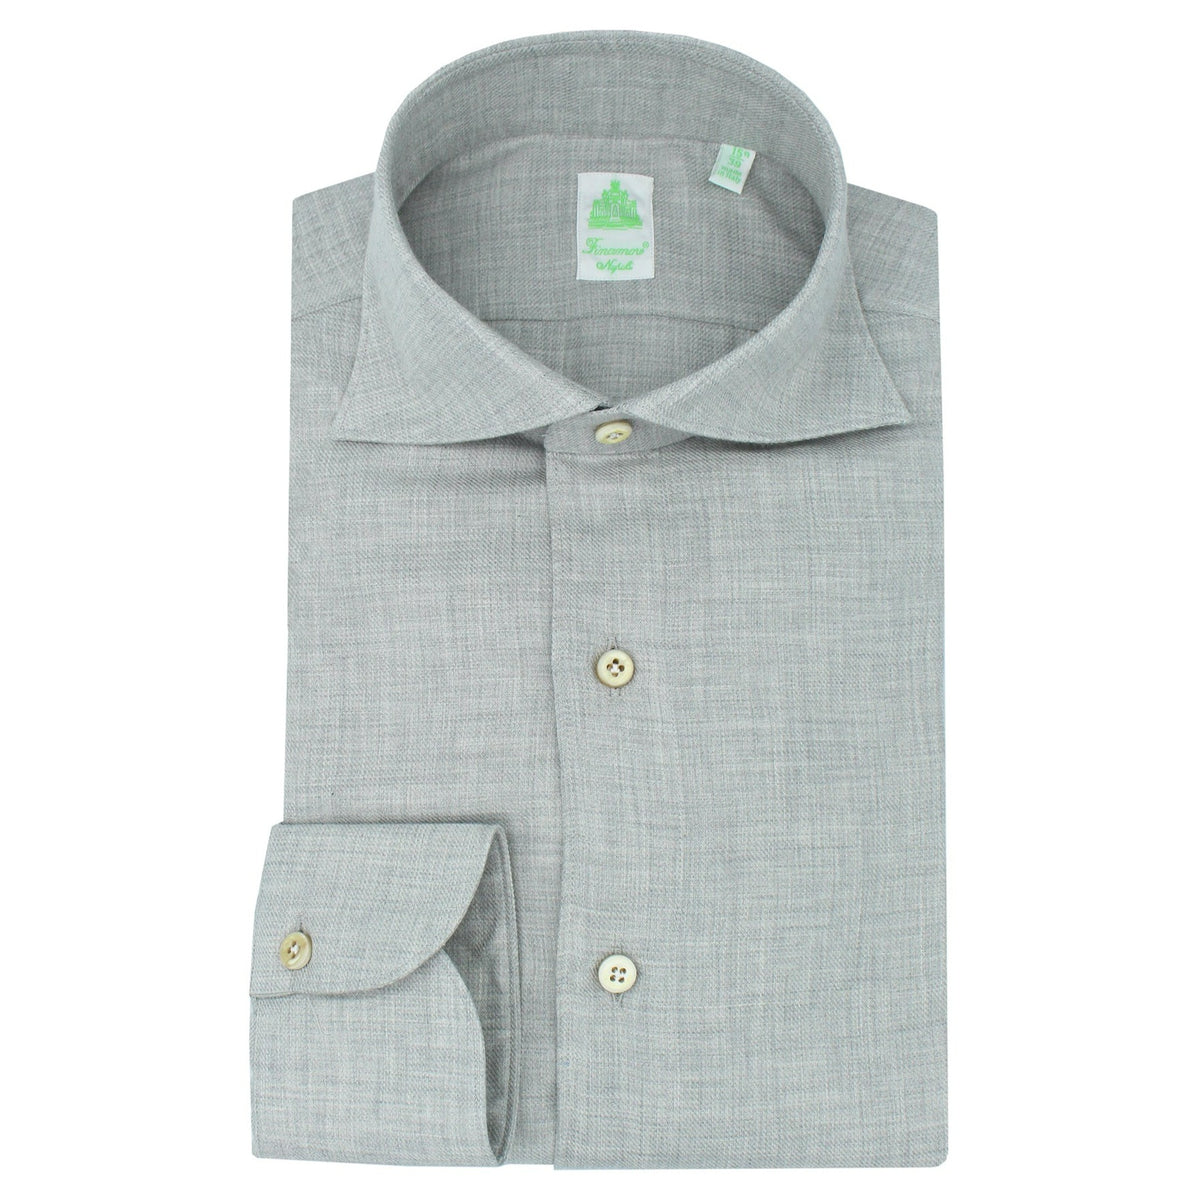 Gaeta sport shirt in cotton twill and cashmere